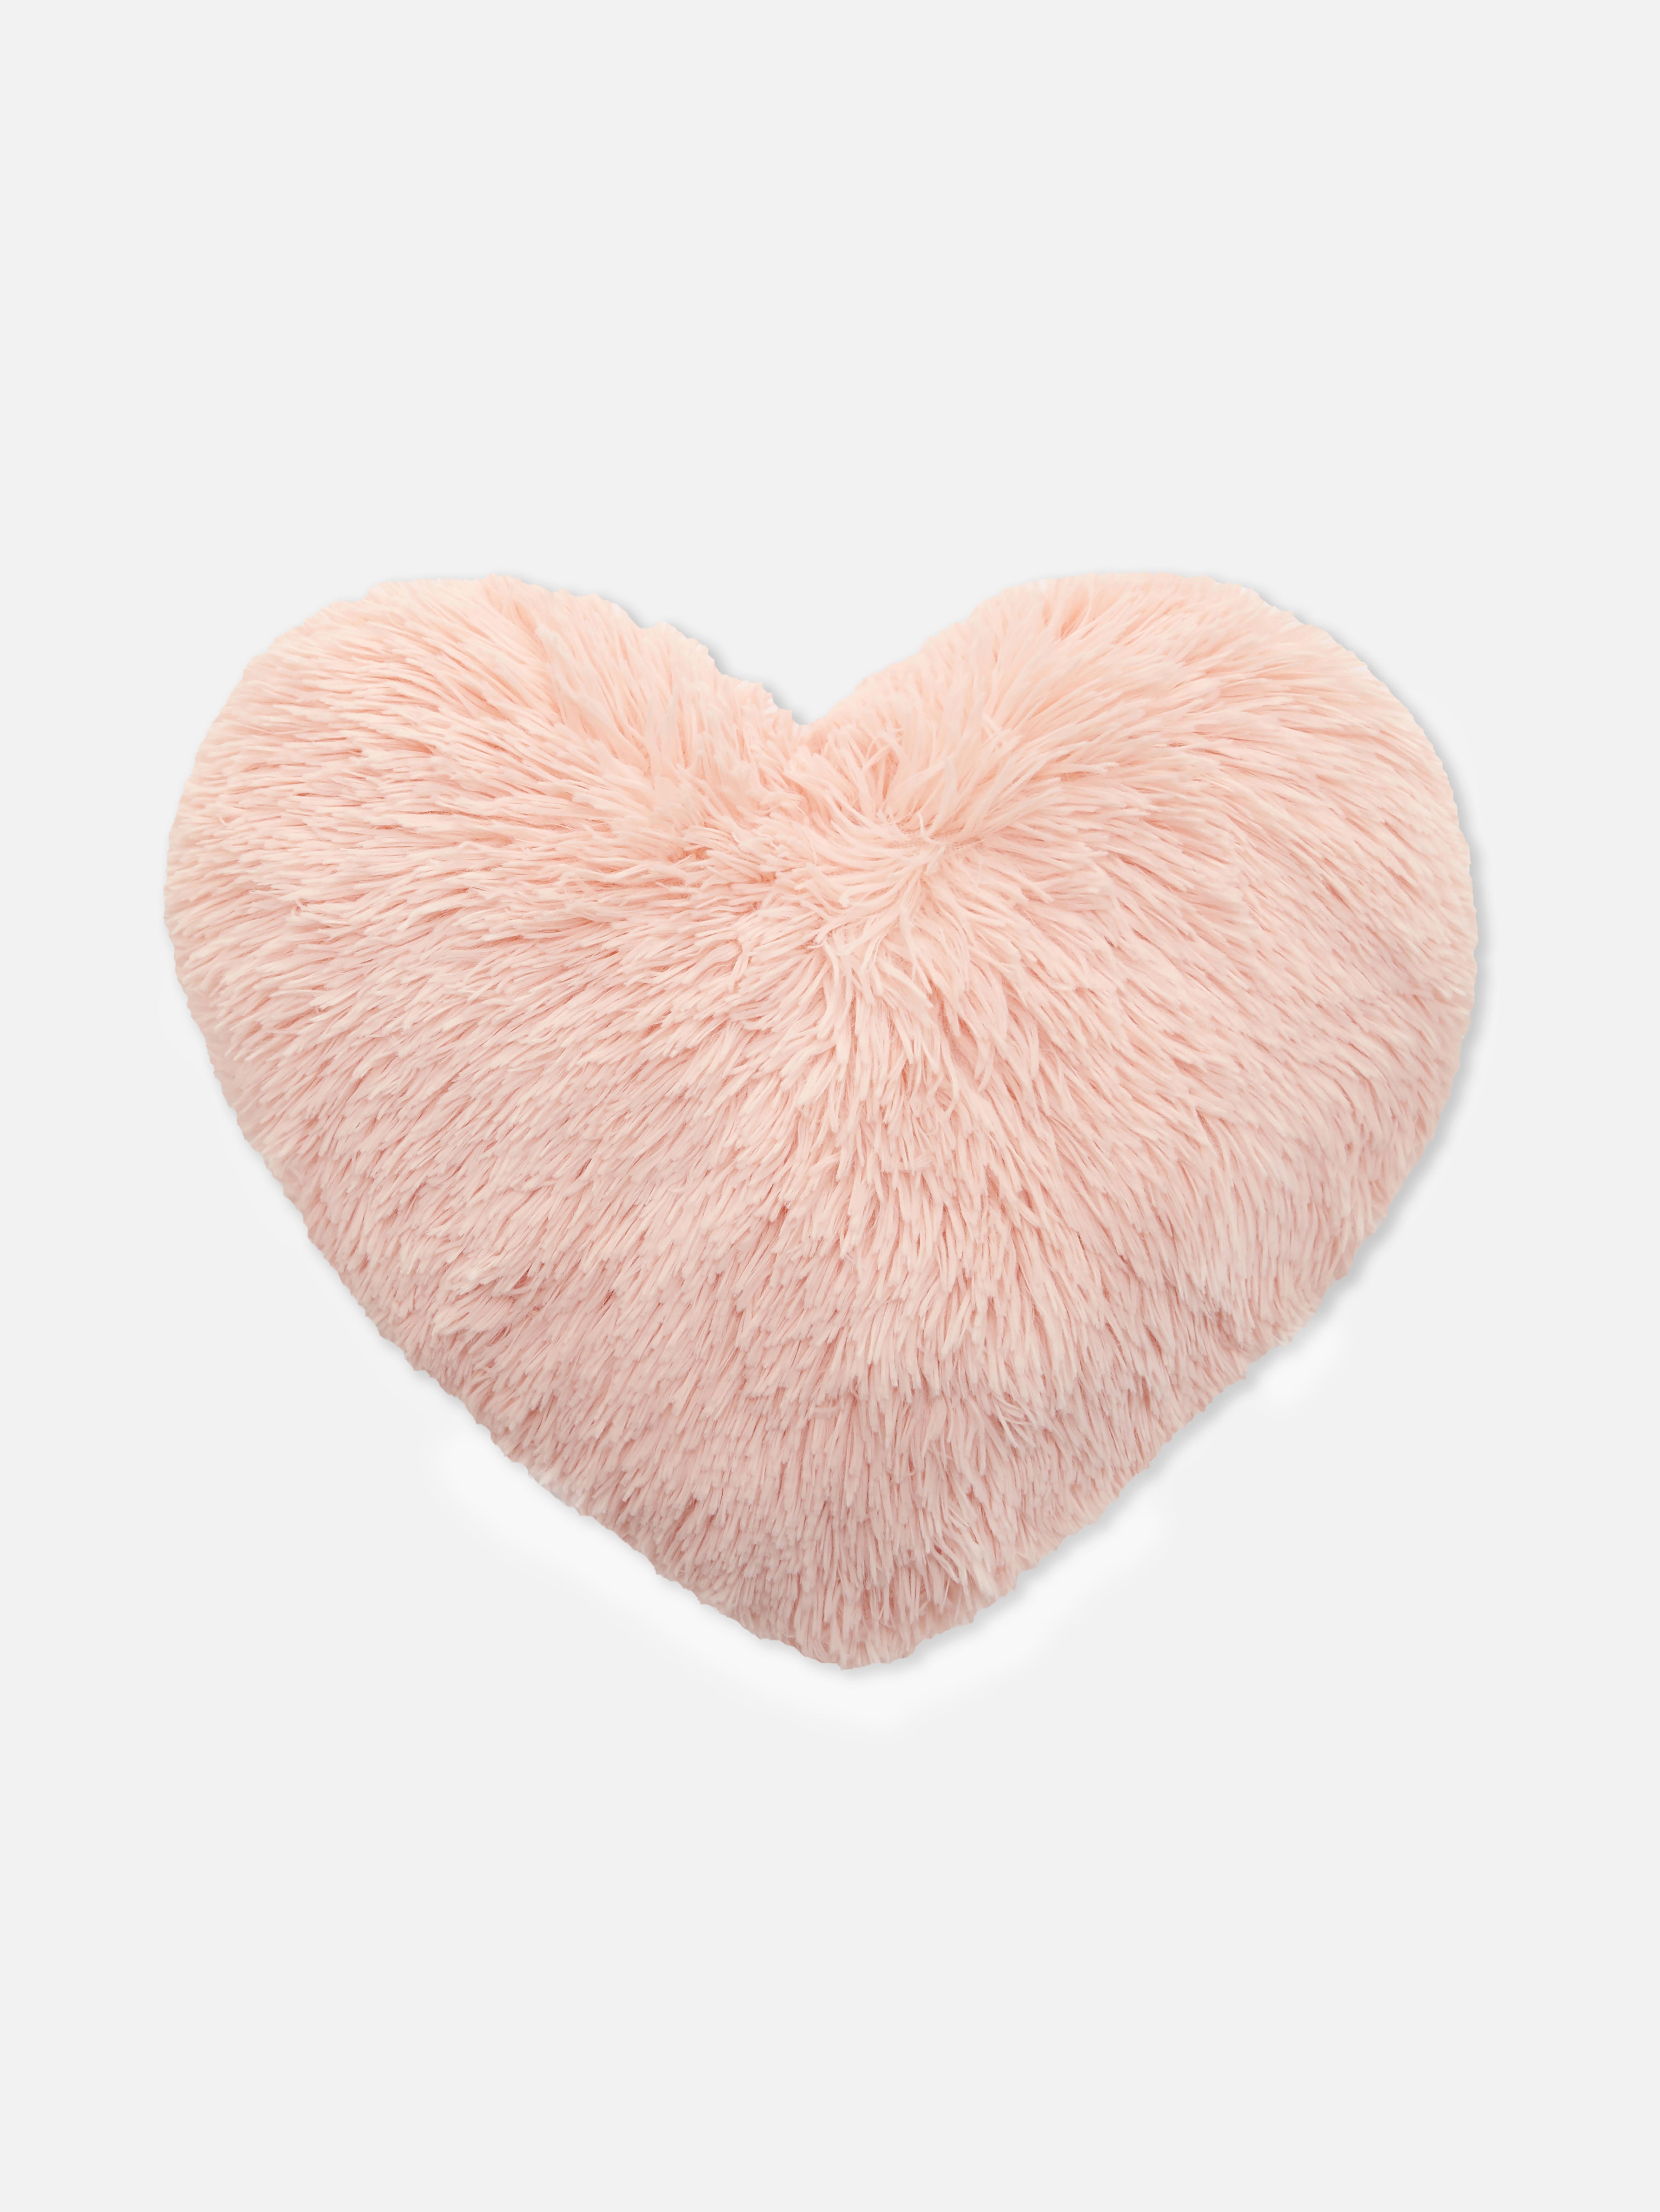 Hot Pink Heart Shaped Pillow Fluffy Faux Fur - Small Size Mother's Day Gift